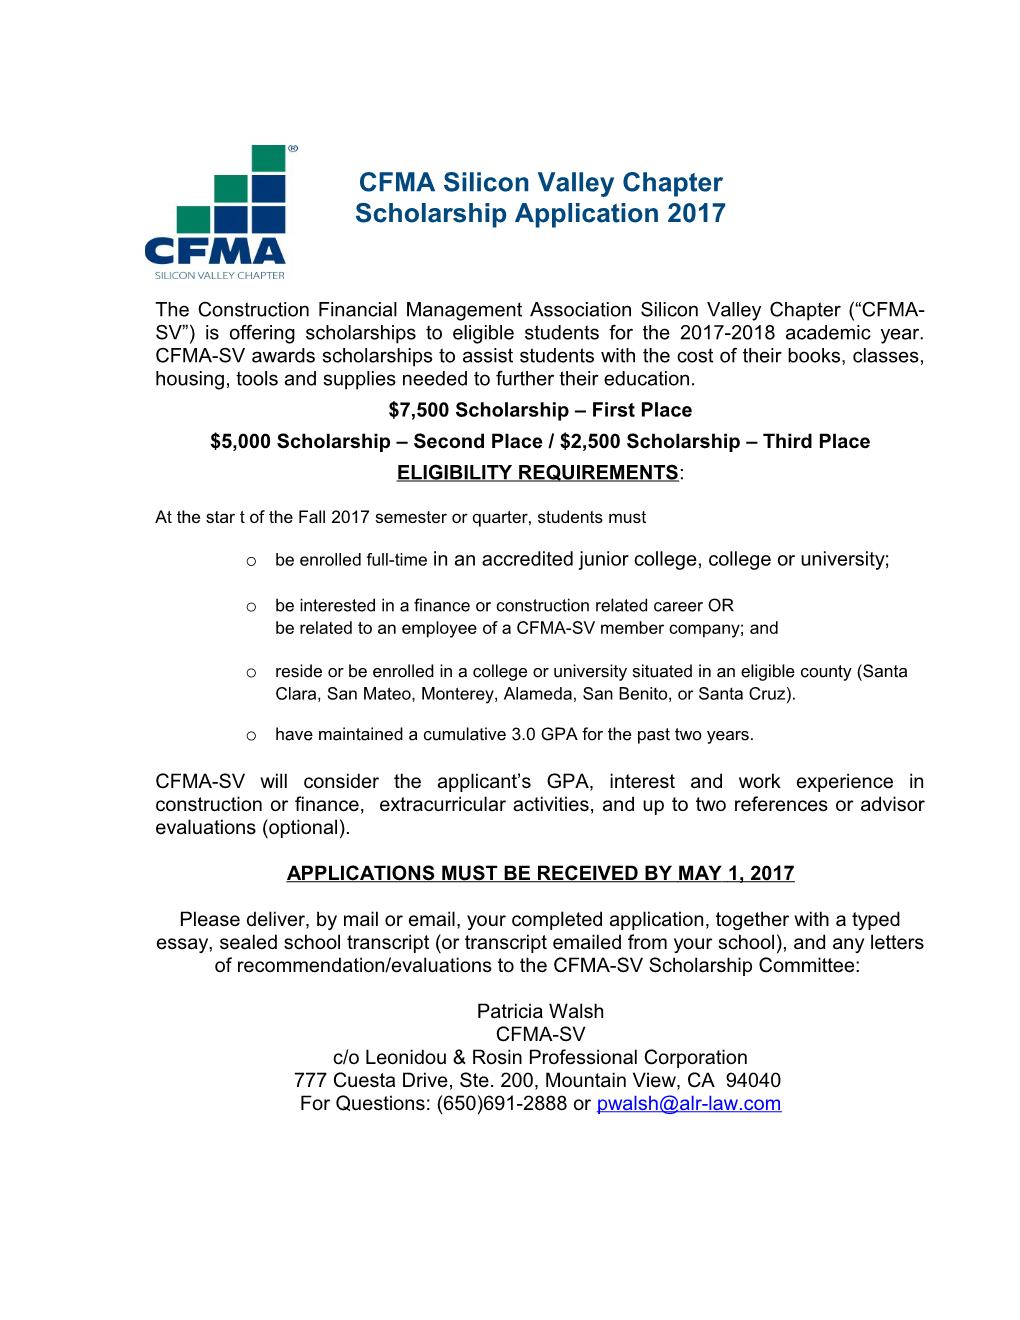 Revised 2017 CFMA Scholarship Announcement and Application (00195402-2)